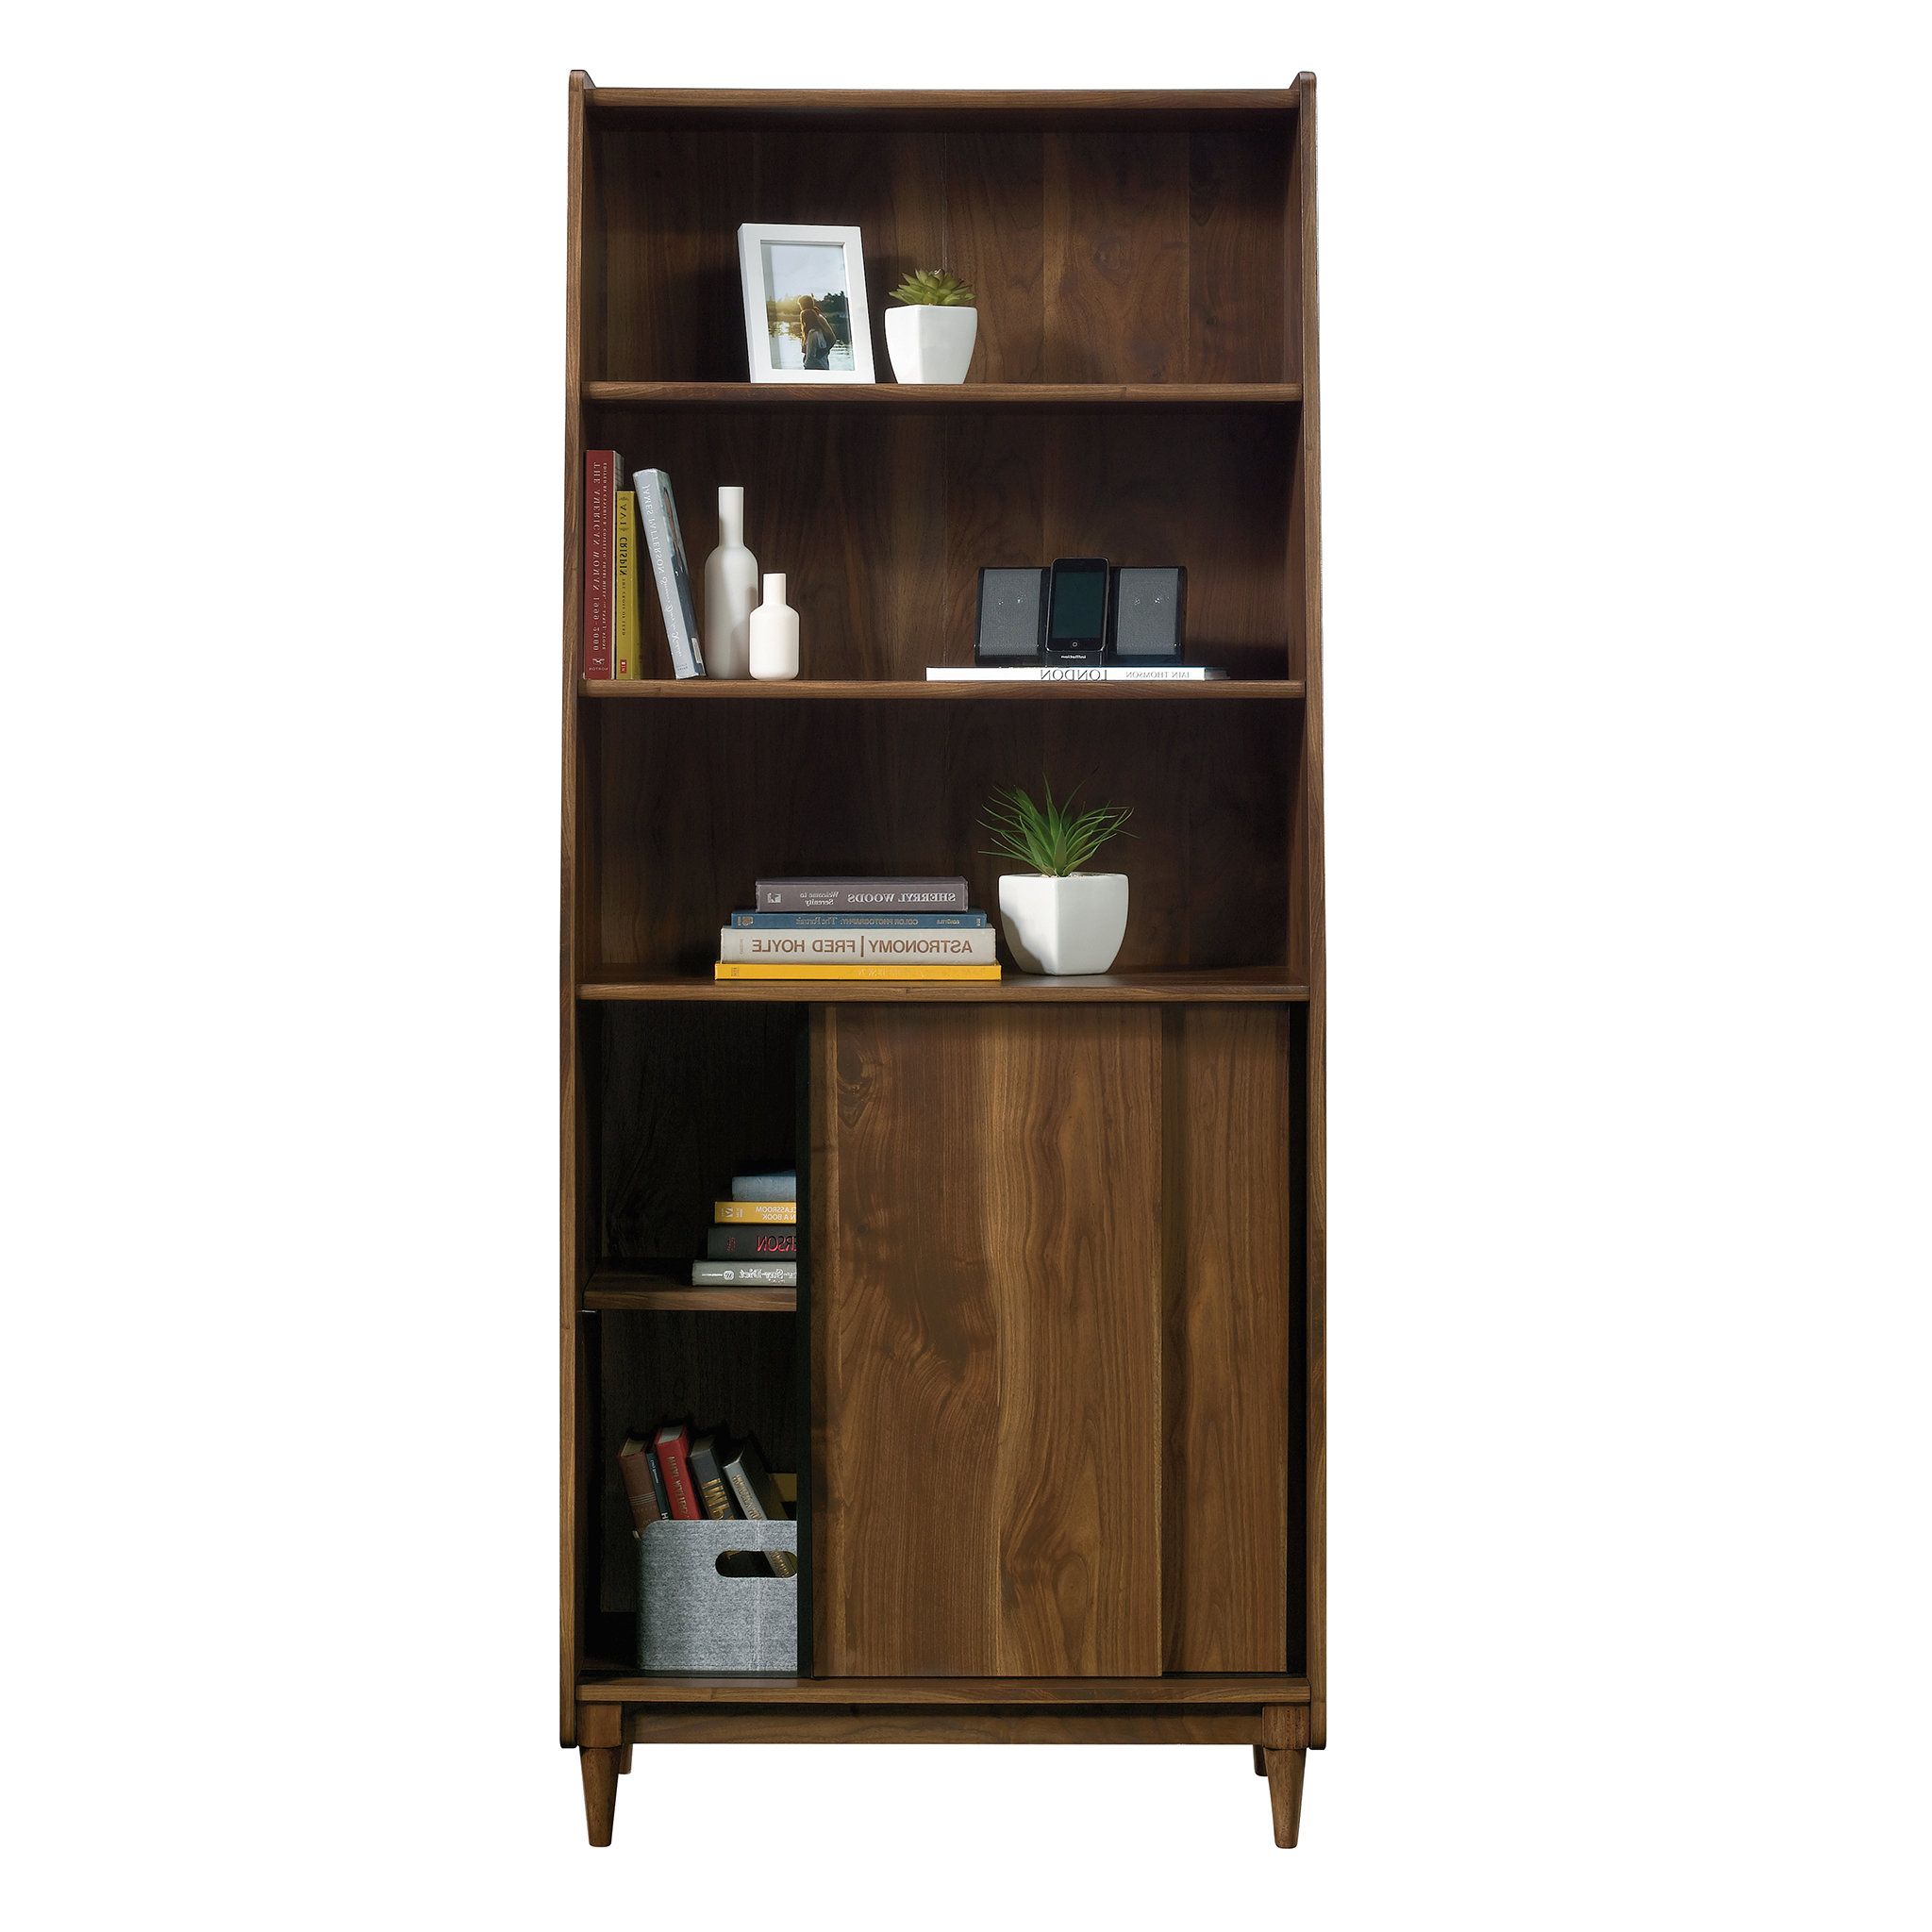 2020 Harkless Standard Bookcases With Regard To Posner Standard Bookcase (View 19 of 20)